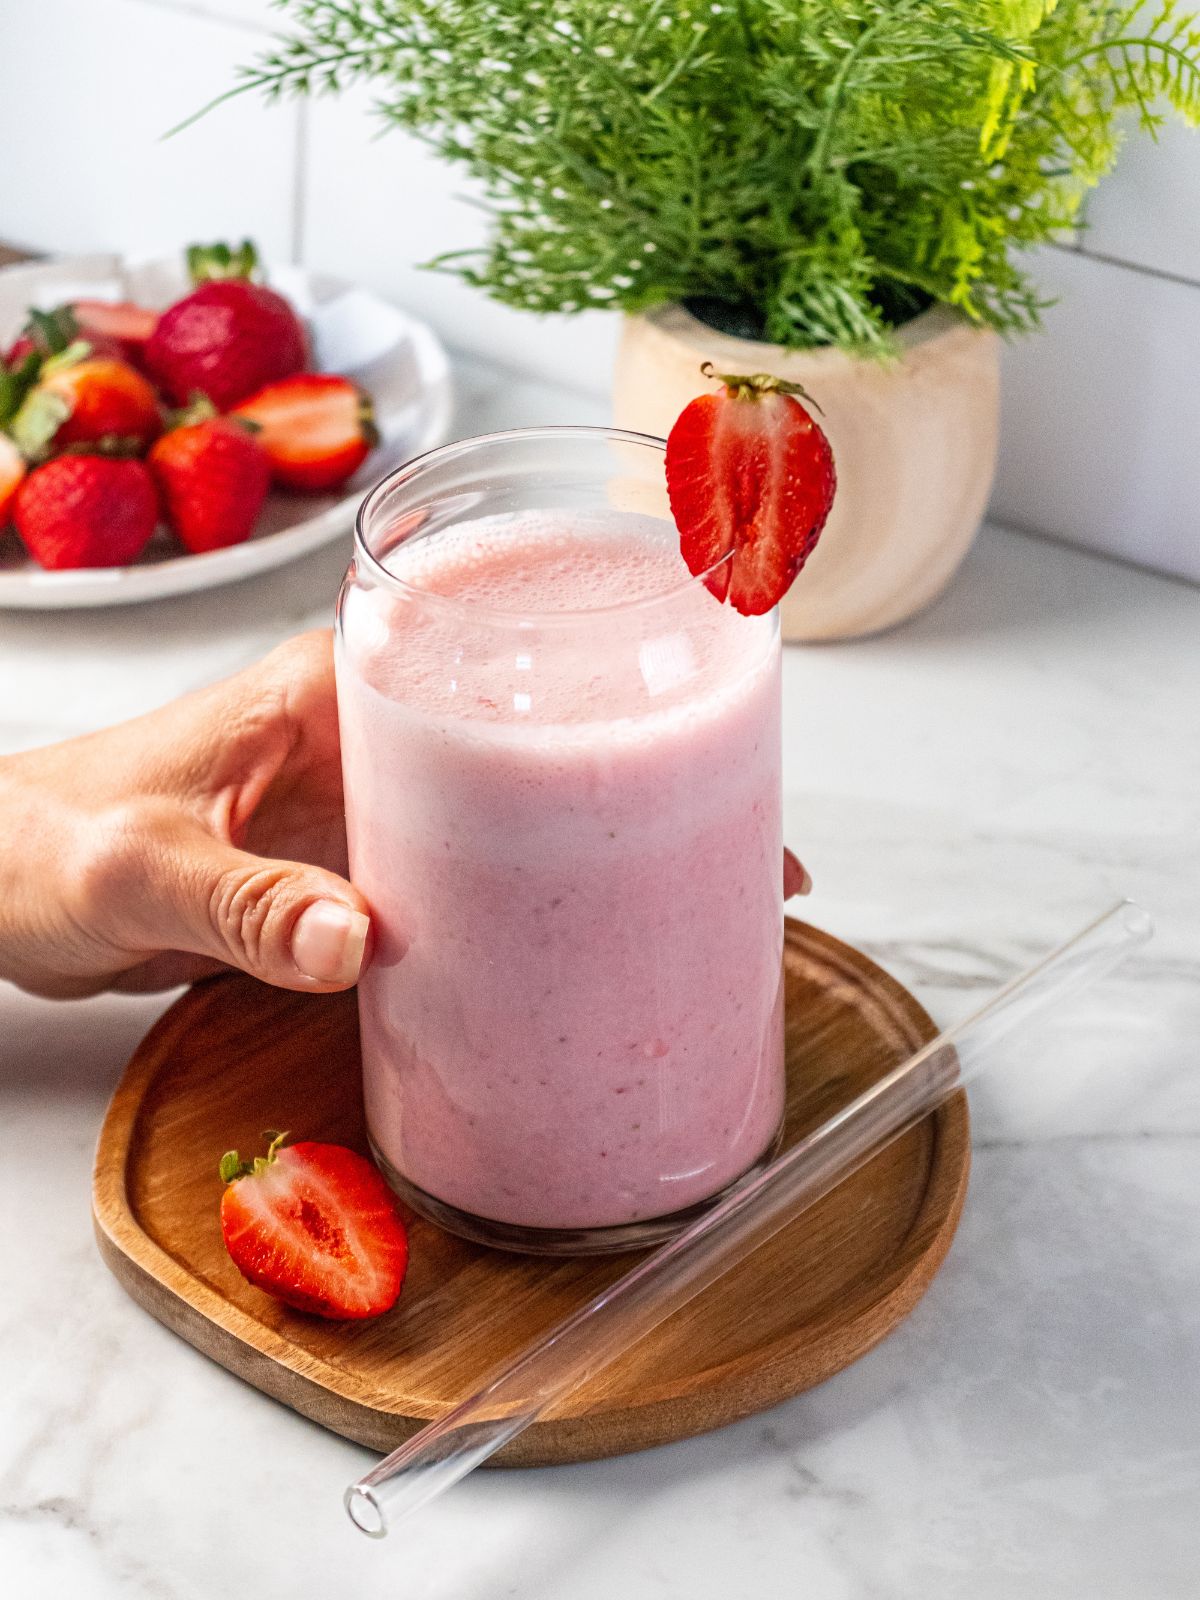 A hand reaching in to grab a pink greek yogurt smoothie in a glass with a glass straw on the side and half a strawberry.